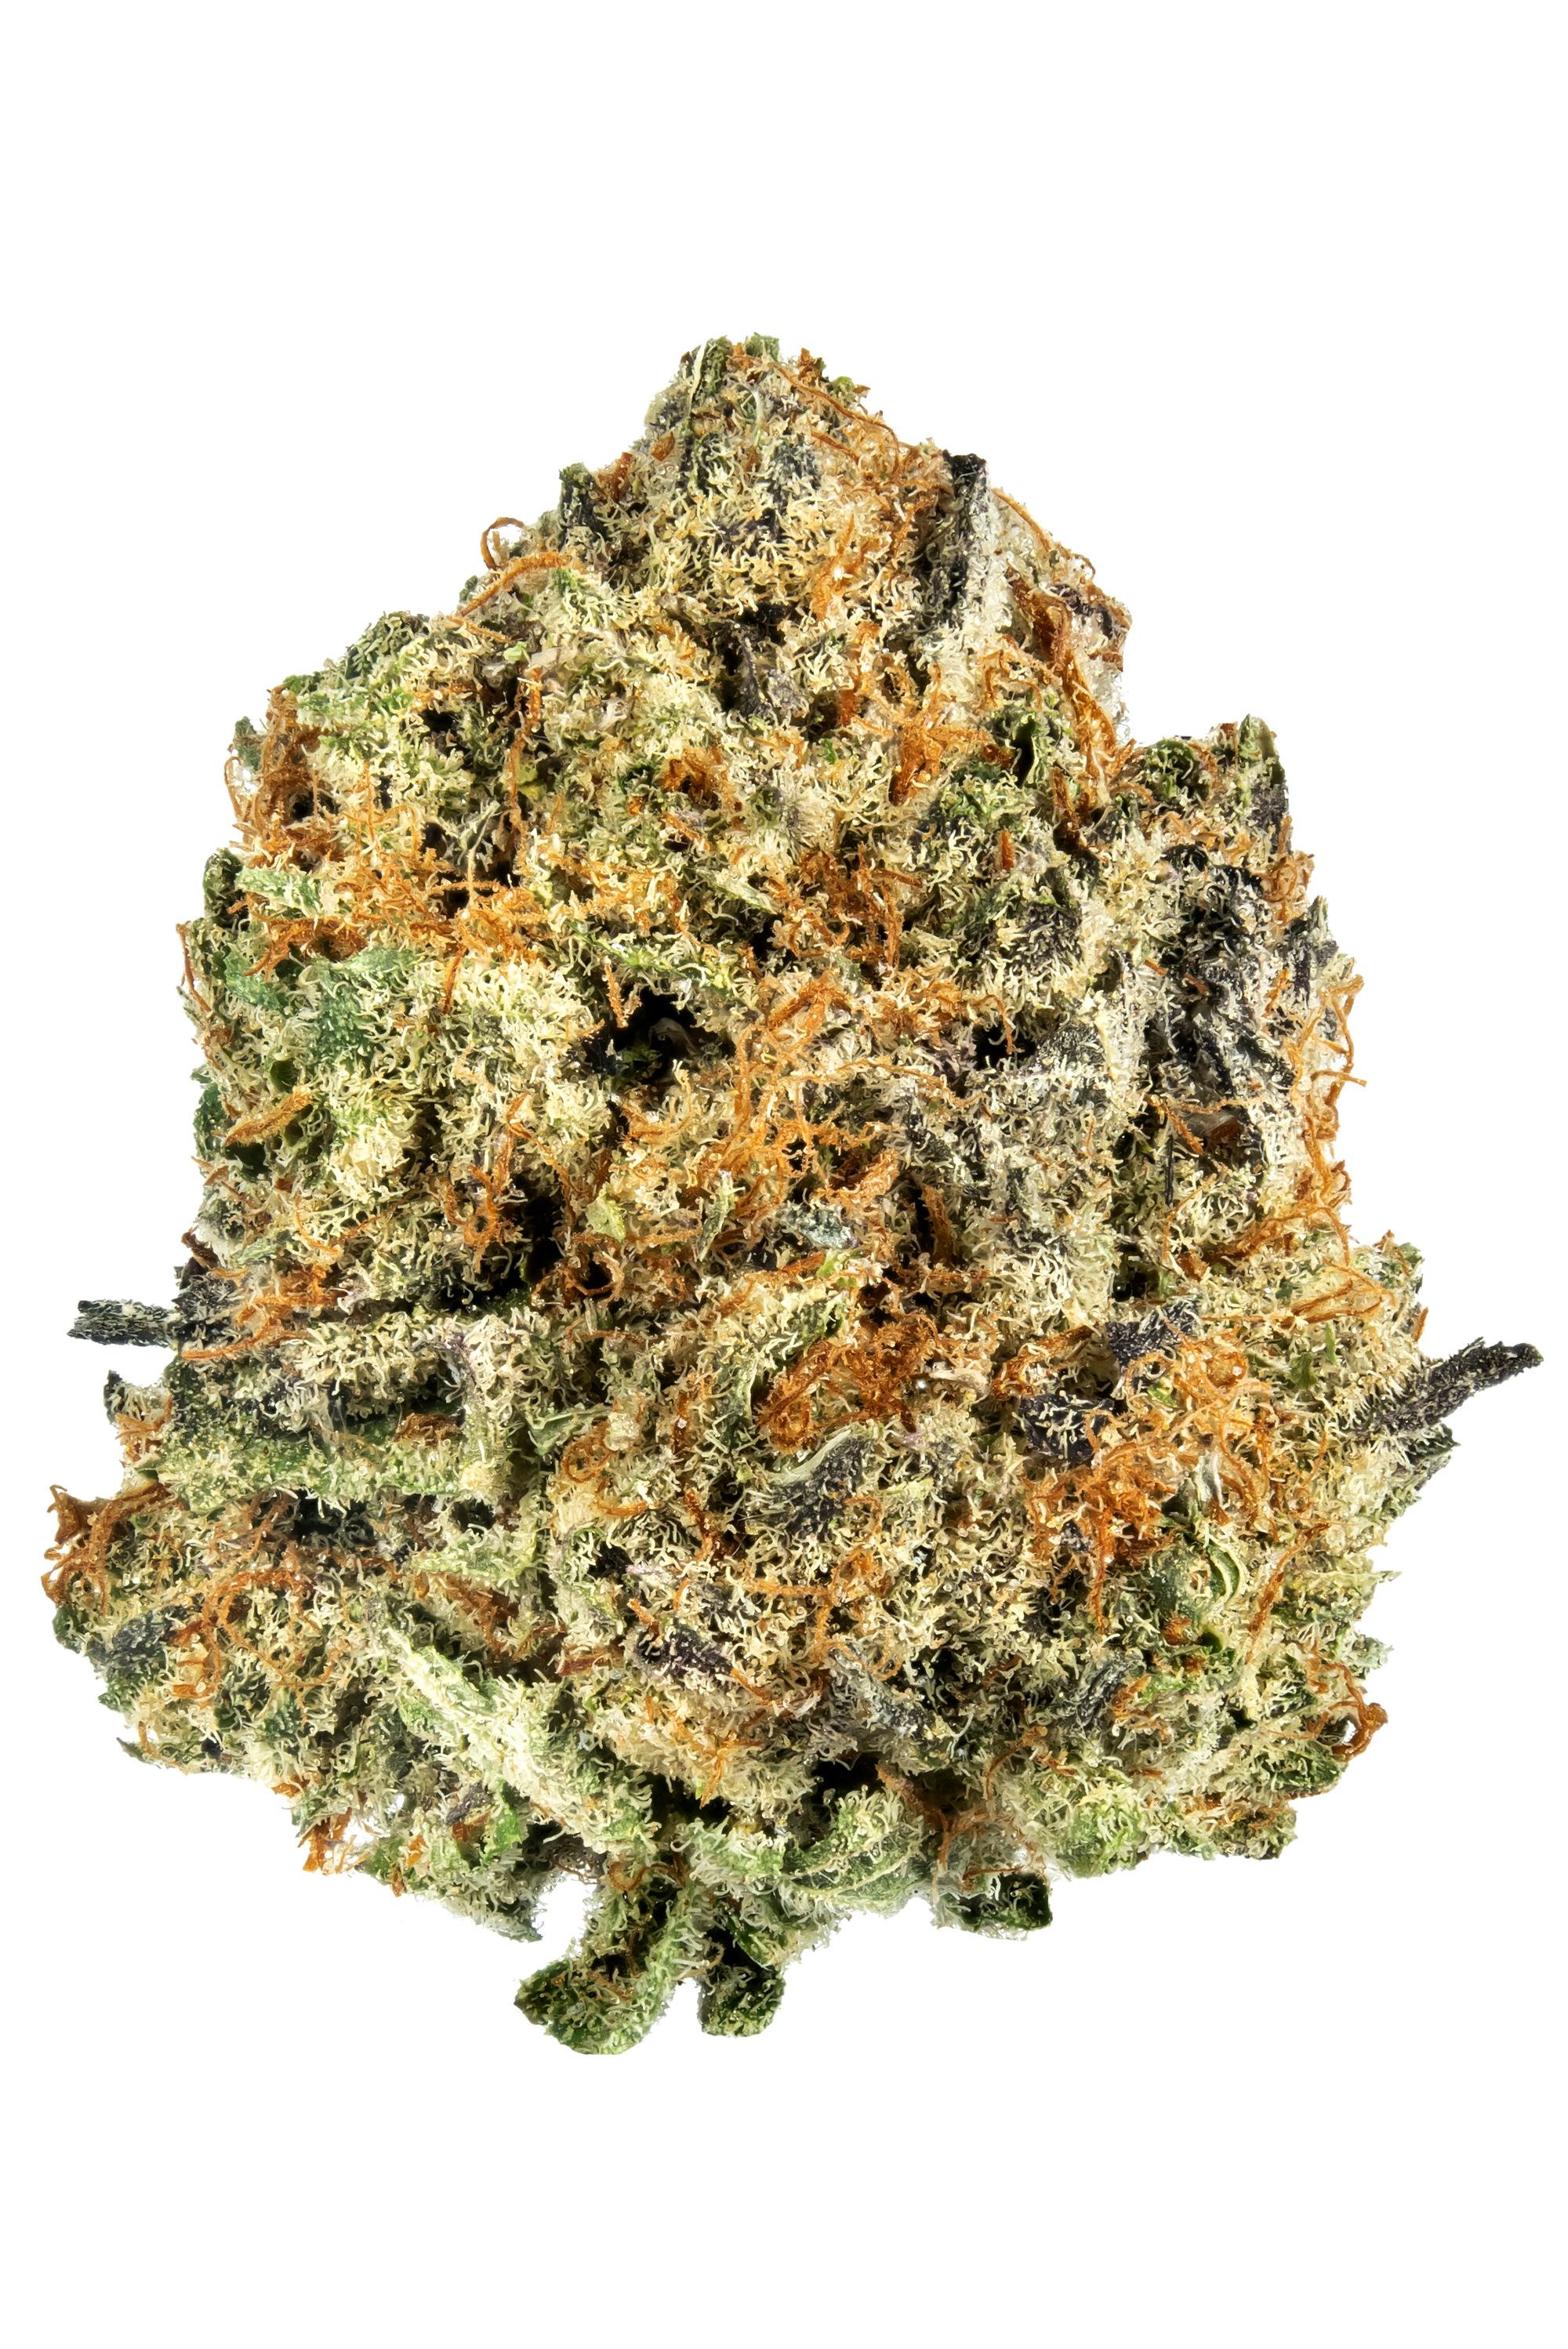 Bubba Kush Strain (Buy Online) - Side Effects, Grow Tips & More